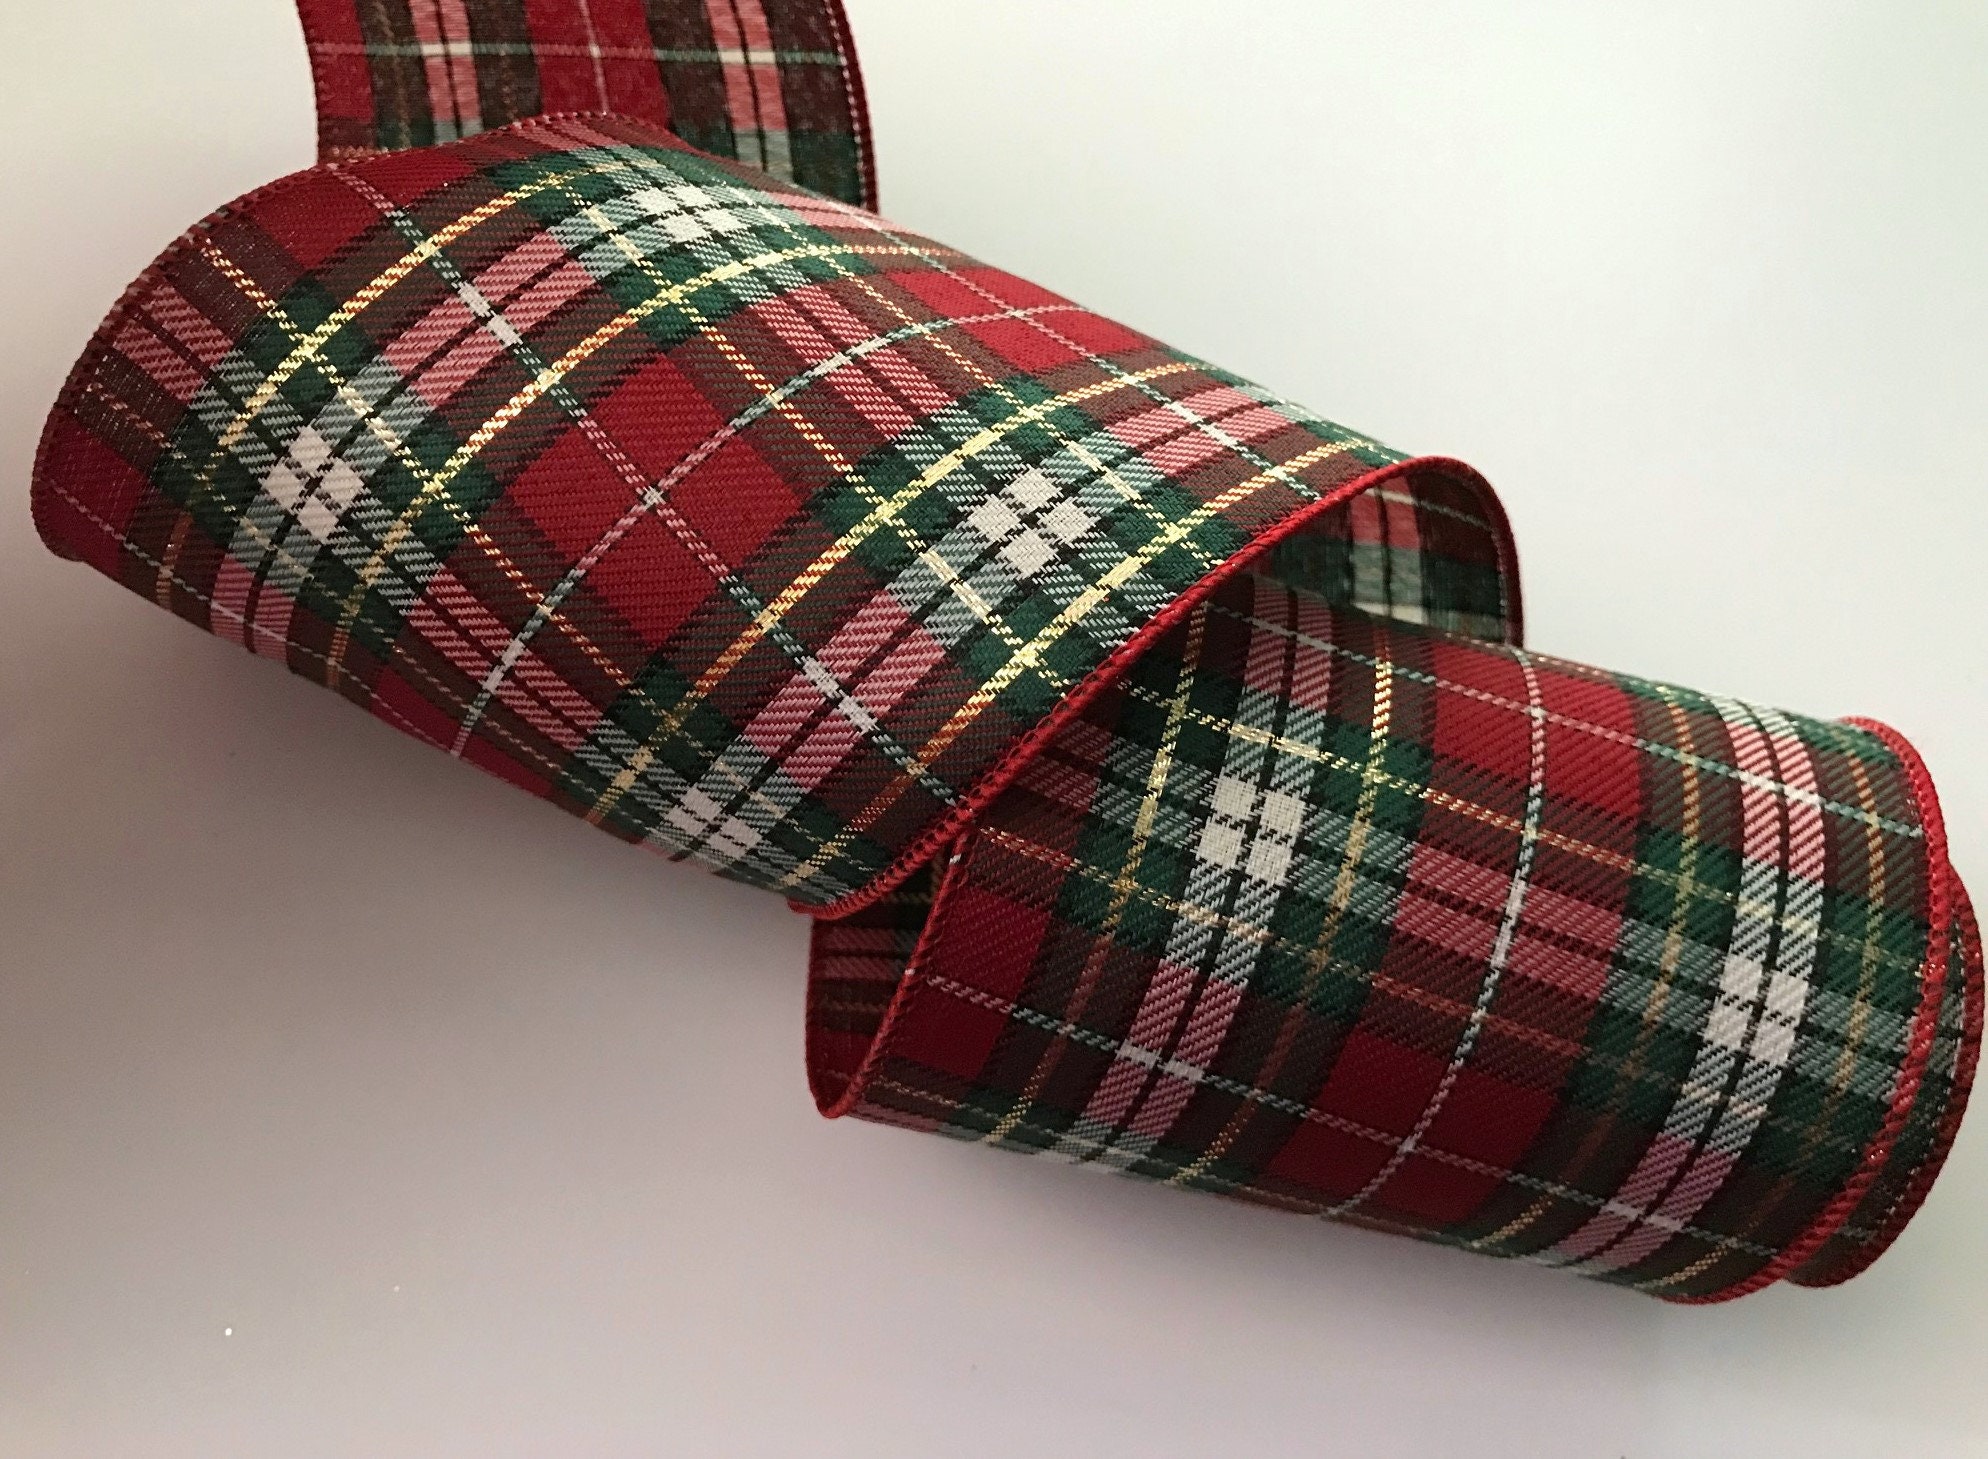 25mm 50Yard Double-sided Gingham Ribbon Scottish Grid Checkered Taffeta  Plaid Ribbon 100% Polyester Home Decoration Gift Wrappin